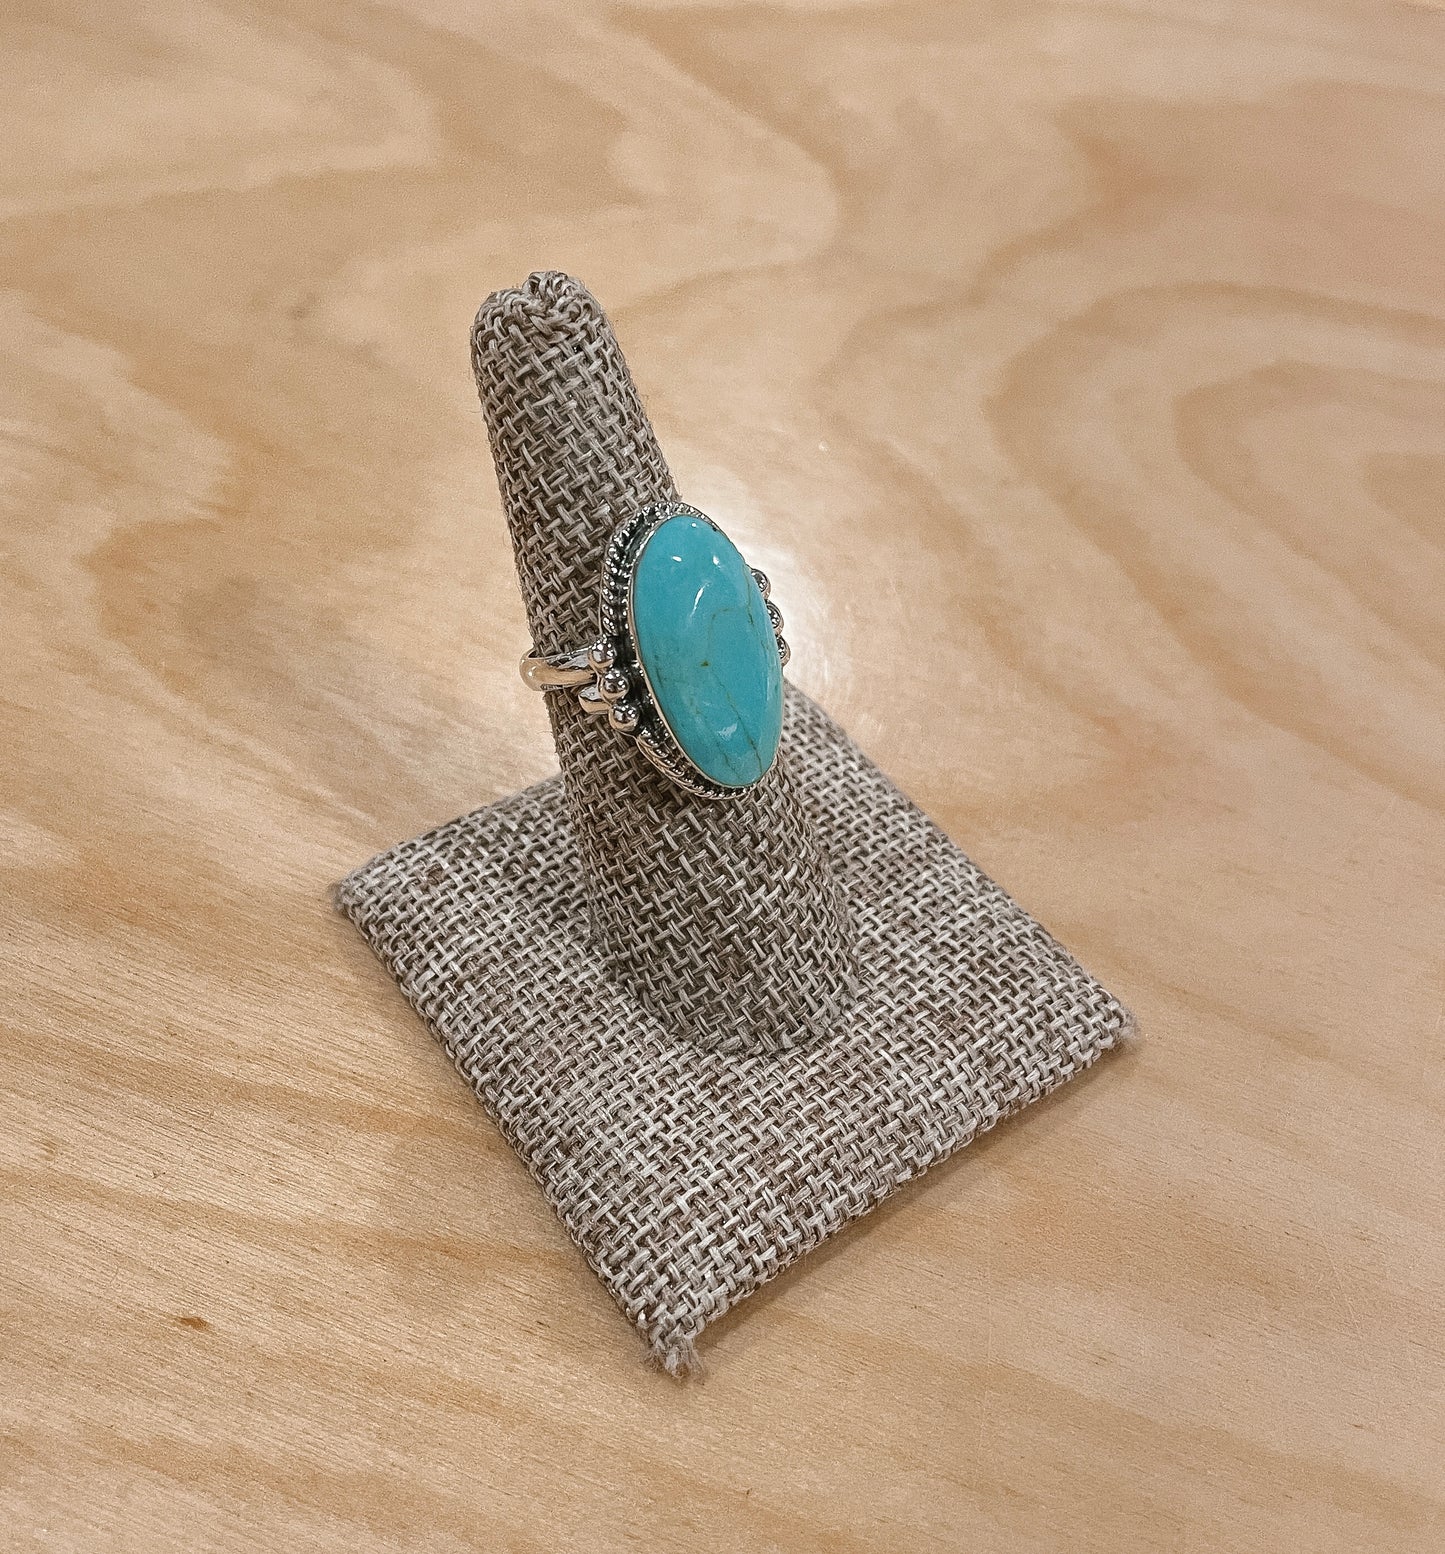 Turquoise Oval Adjustable Ring